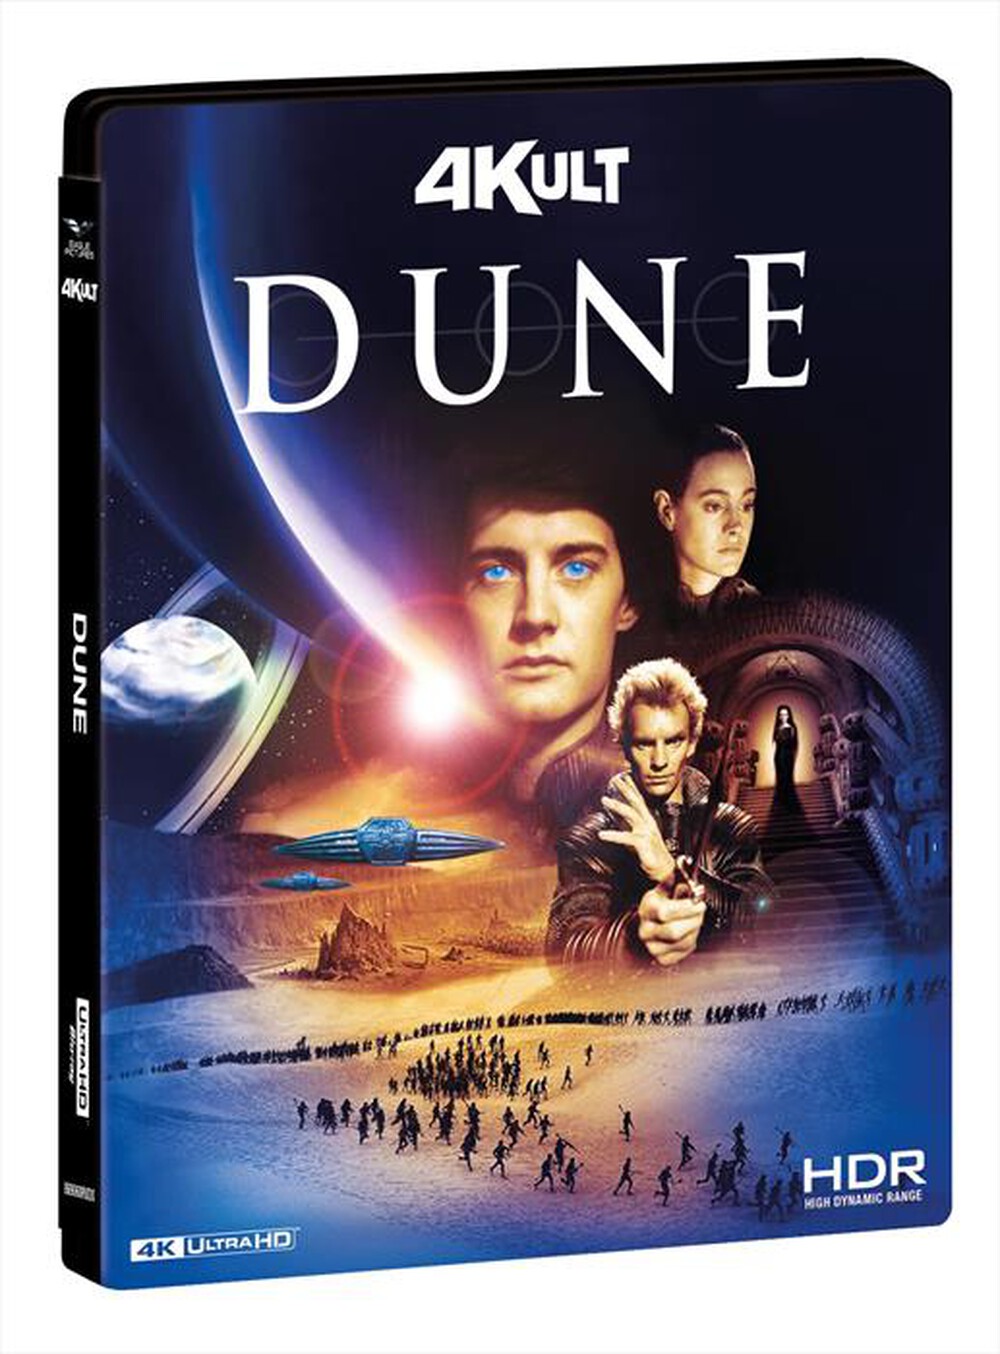 "EAGLE PICTURES - Dune (4K Ultra Hd+Blu-Ray) (1984)"